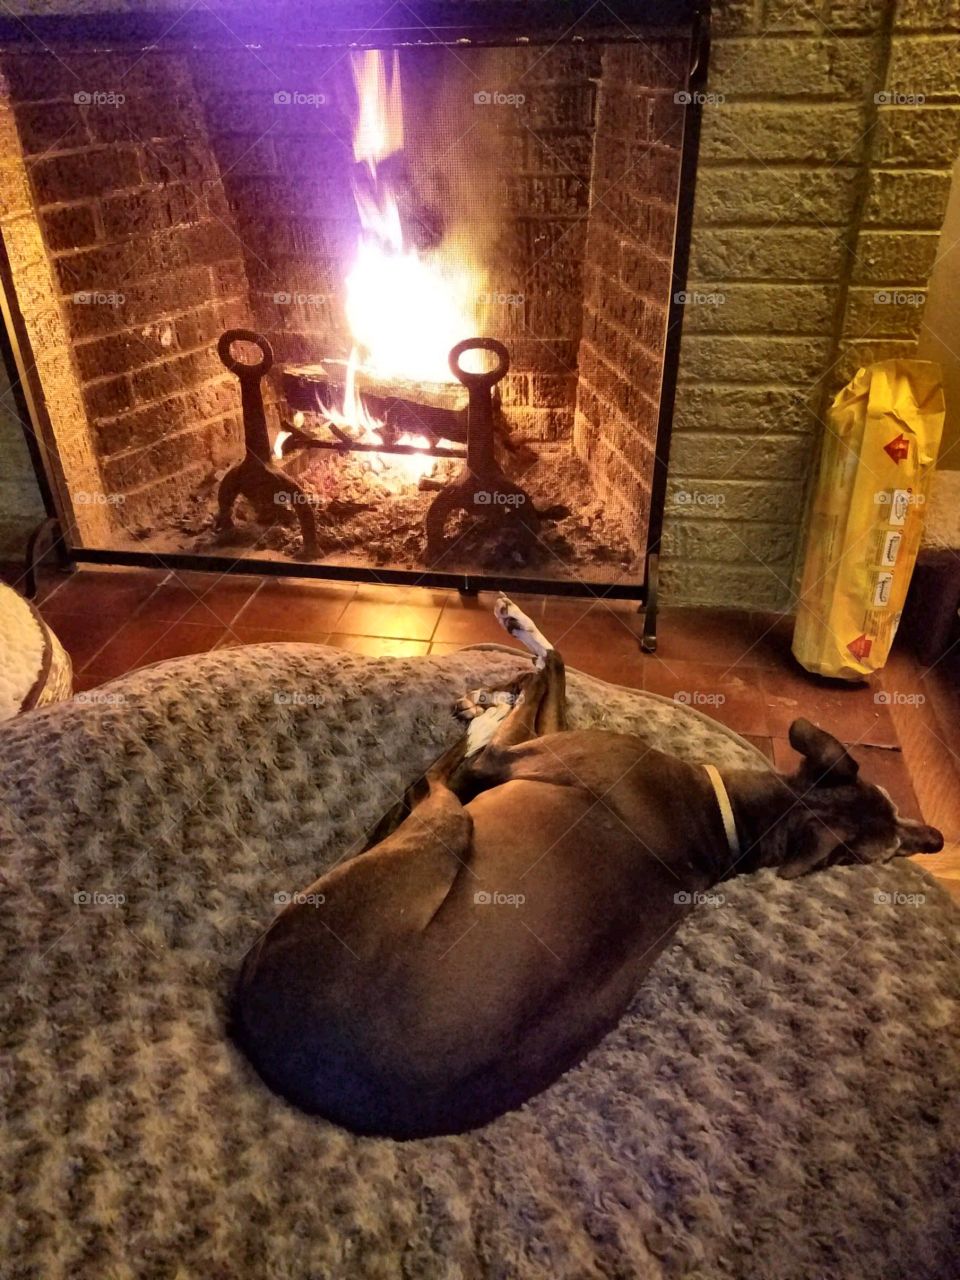 Dog laying on bed in front of burning fireplace.